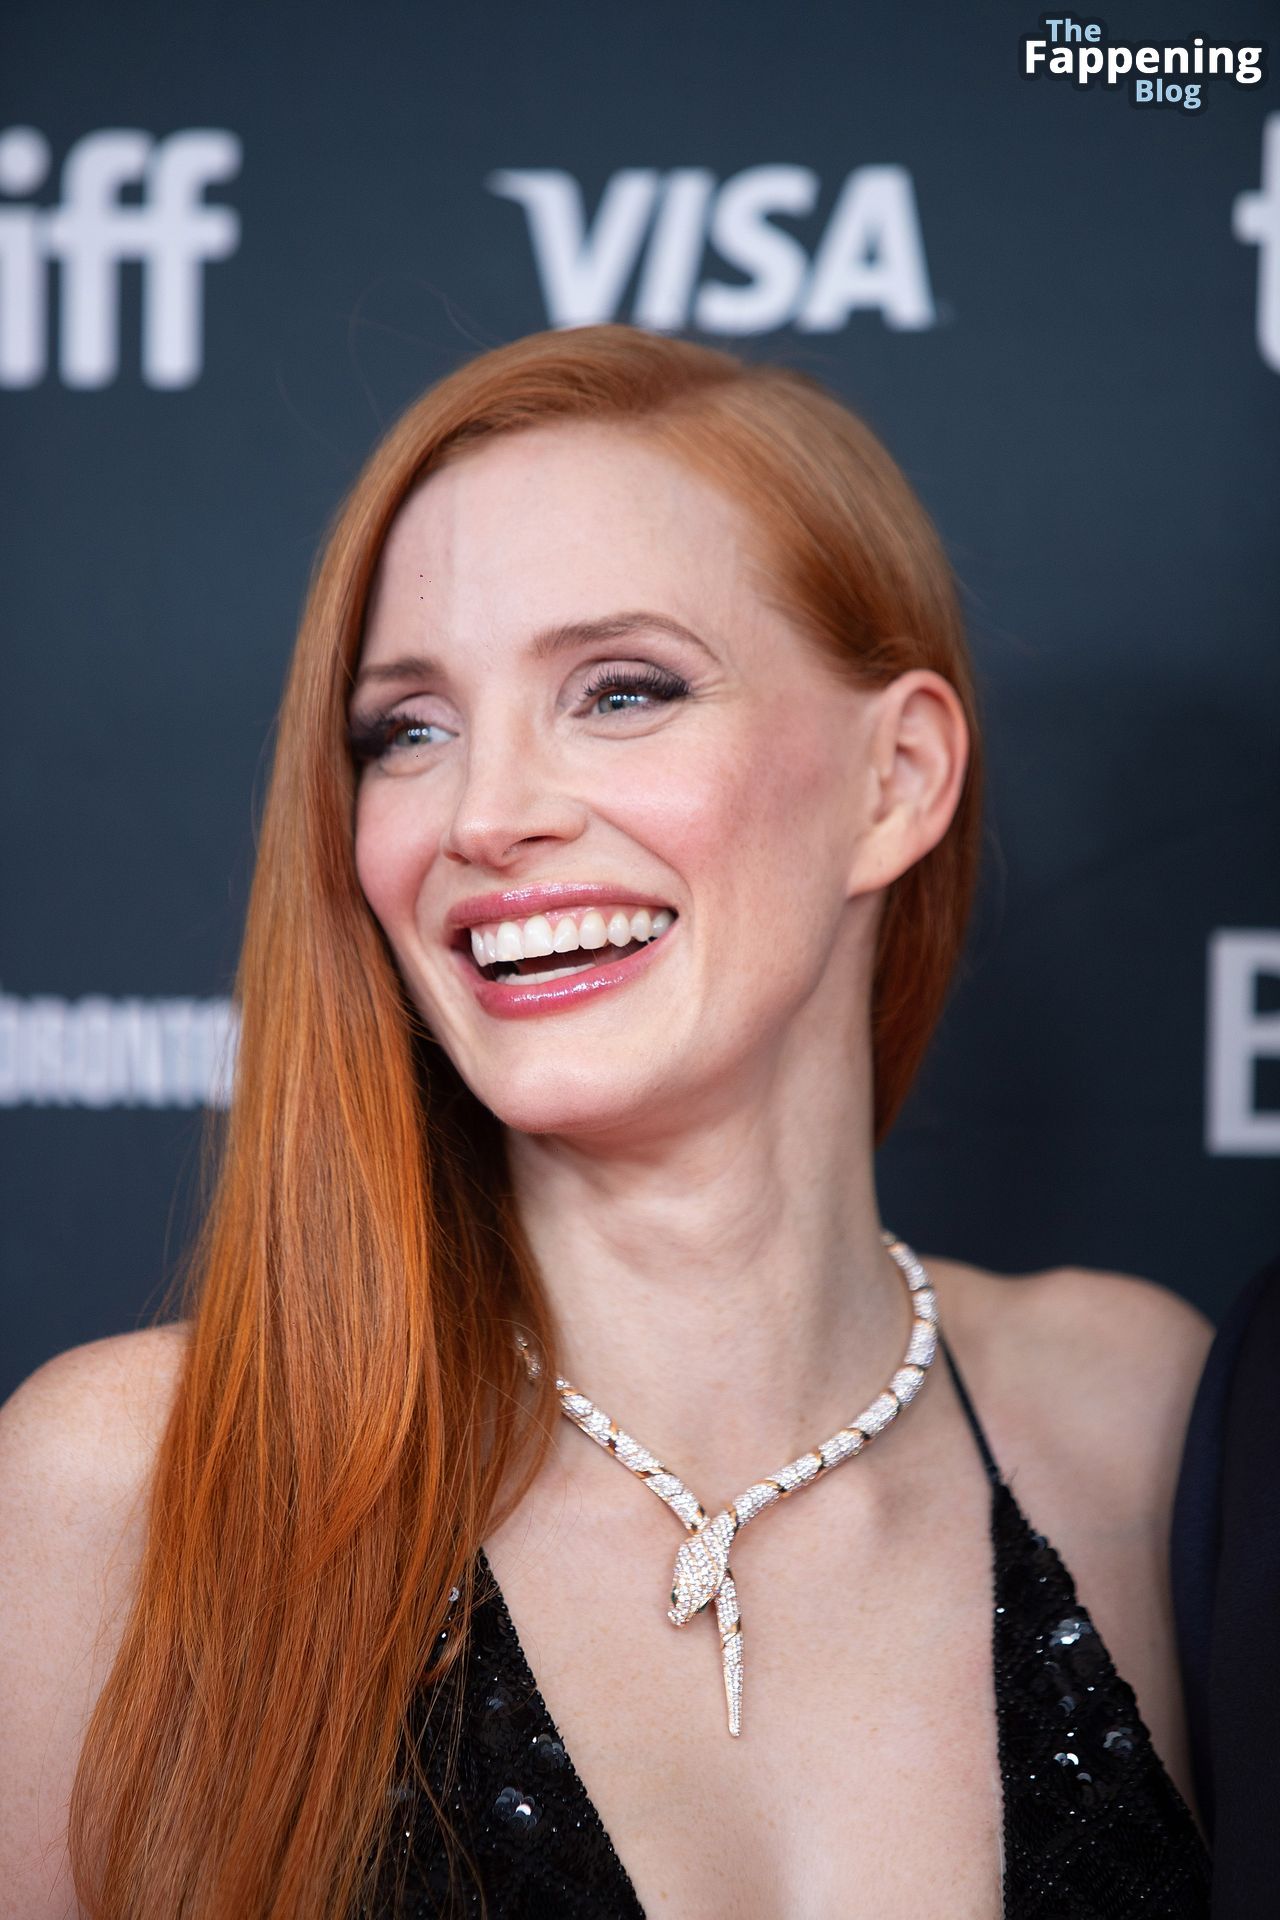 Jessica-Chastain-Sexy-49-The-Fappening-Blog.jpg